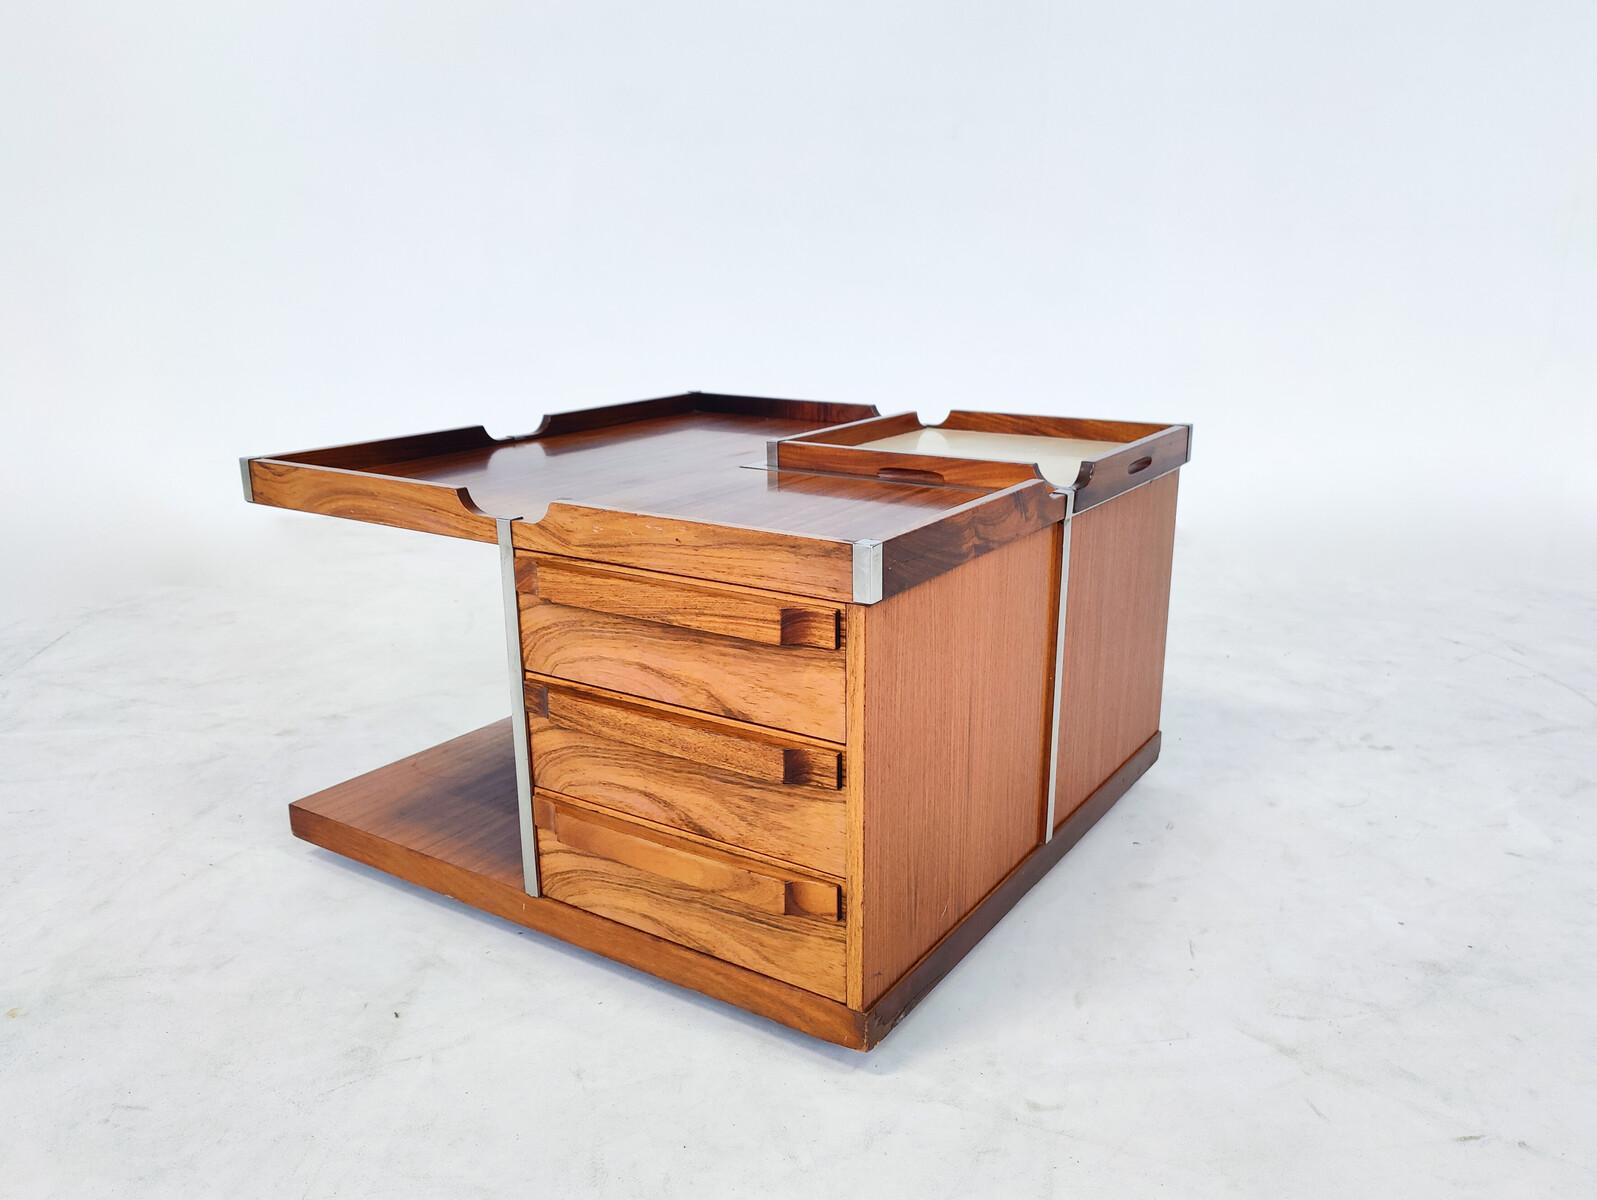 Wood Mid-Century Modern Italian Modular Coffee Table with Built-in Storage by Fiarm